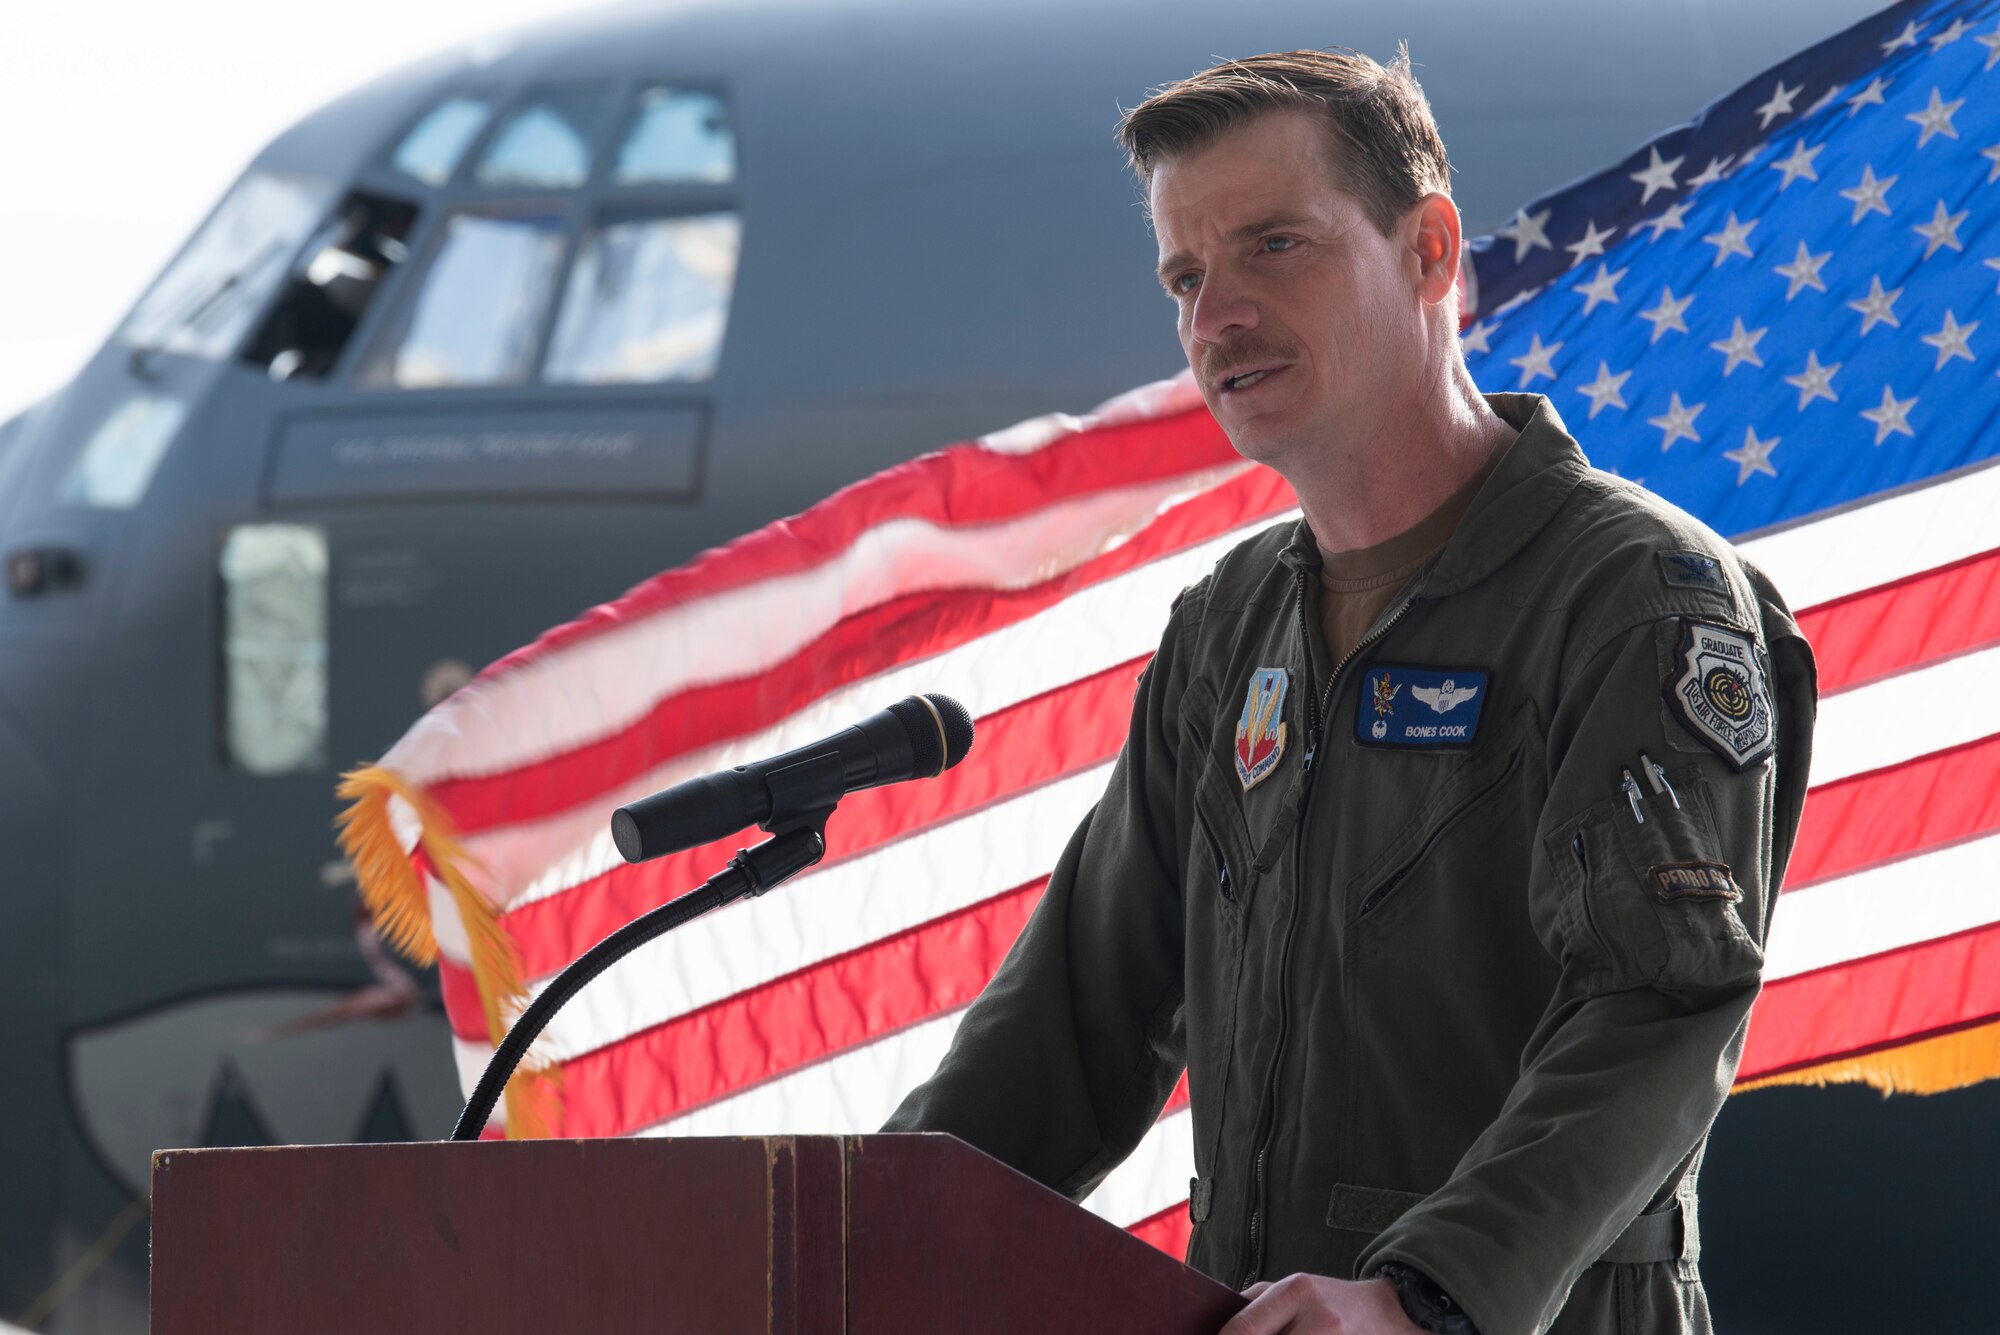 U.S. Air Force Col. Russell “Bones” Cook, 23rd Wing commander, delivers a speech during a Flagship dedication ceremony at Moody Air Force Base, Georgia, March 30, 2022. Flagship aircrafts are dedicated when an officer takes command of an operational unit. (U.S. Air Force photo by Senior Airman Thomas Johns)